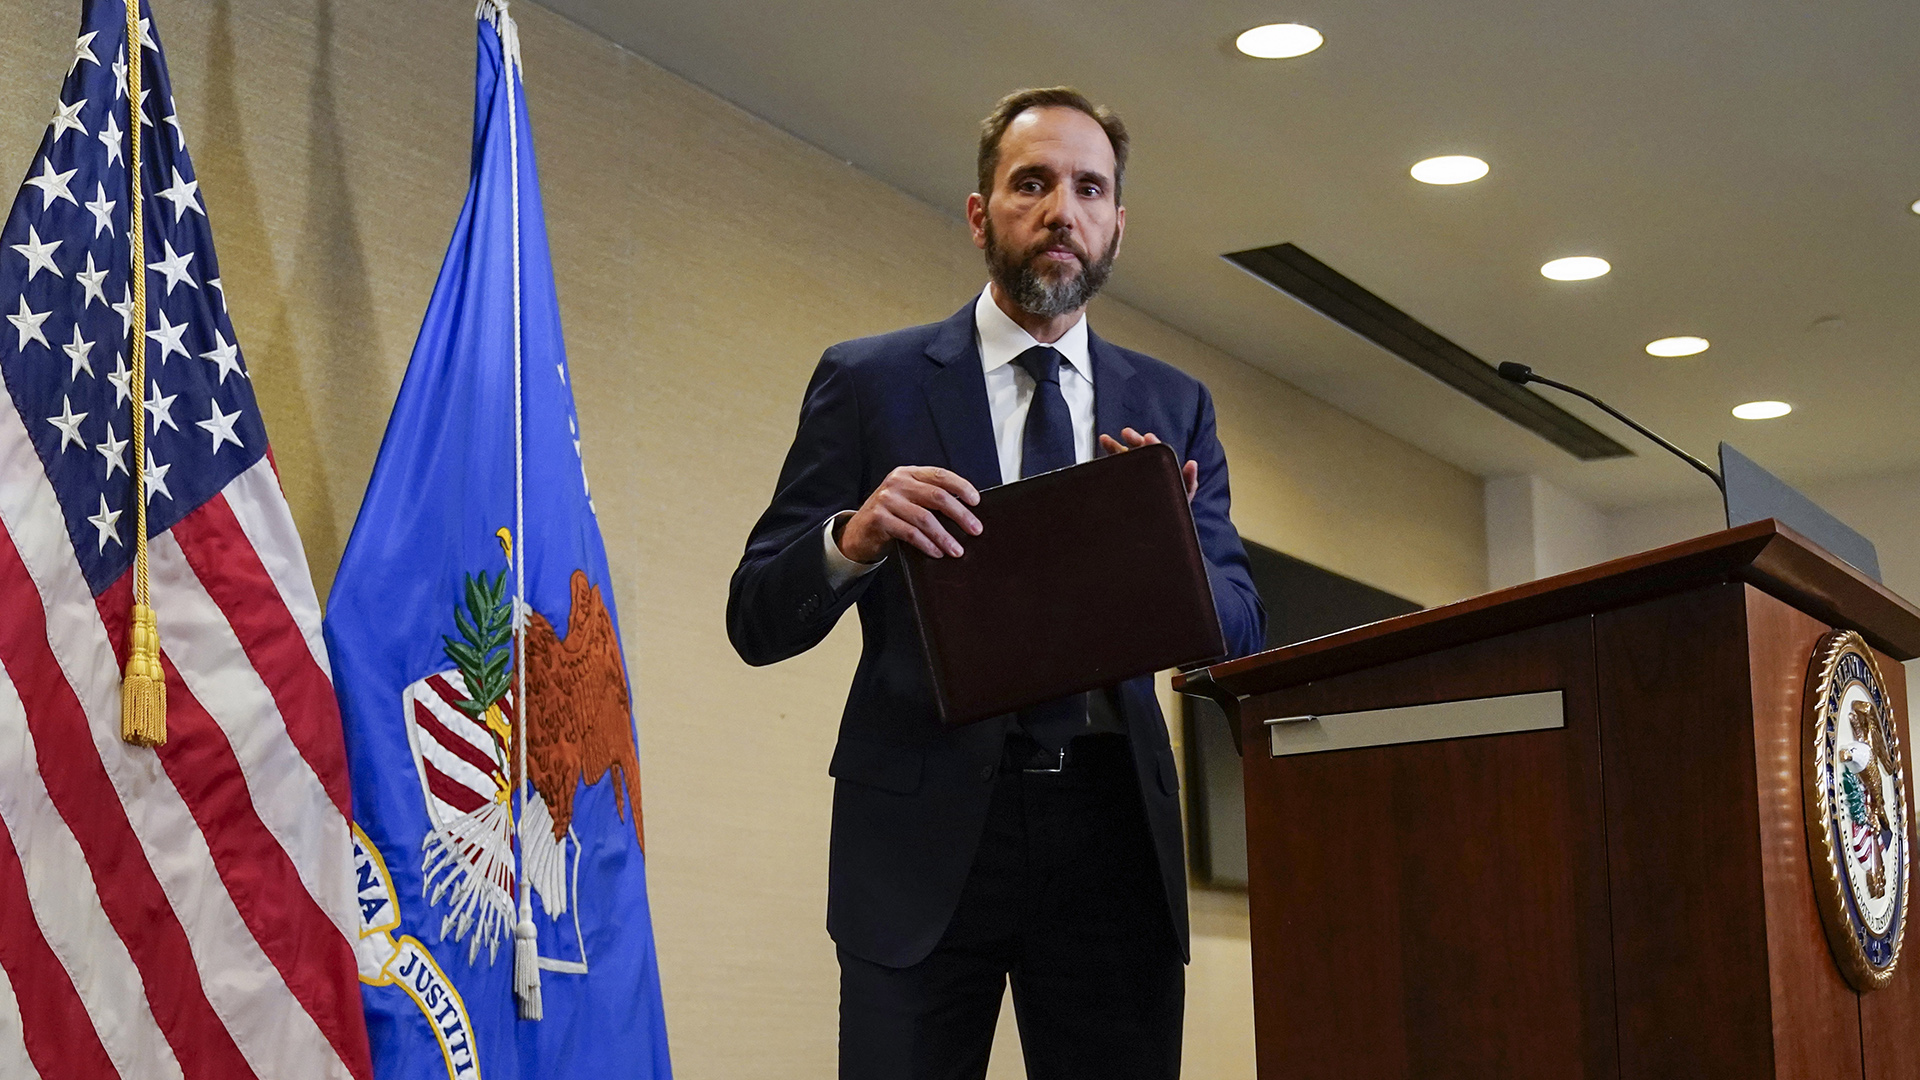 Jack Smith holds a legal brief folder in his hands while stepping away from a wood podium affixed with a microphone and the seal of the U.S. Department of Justice, in a room with recessed fluorescent lighting and the U.S. and Department of Justice flags.